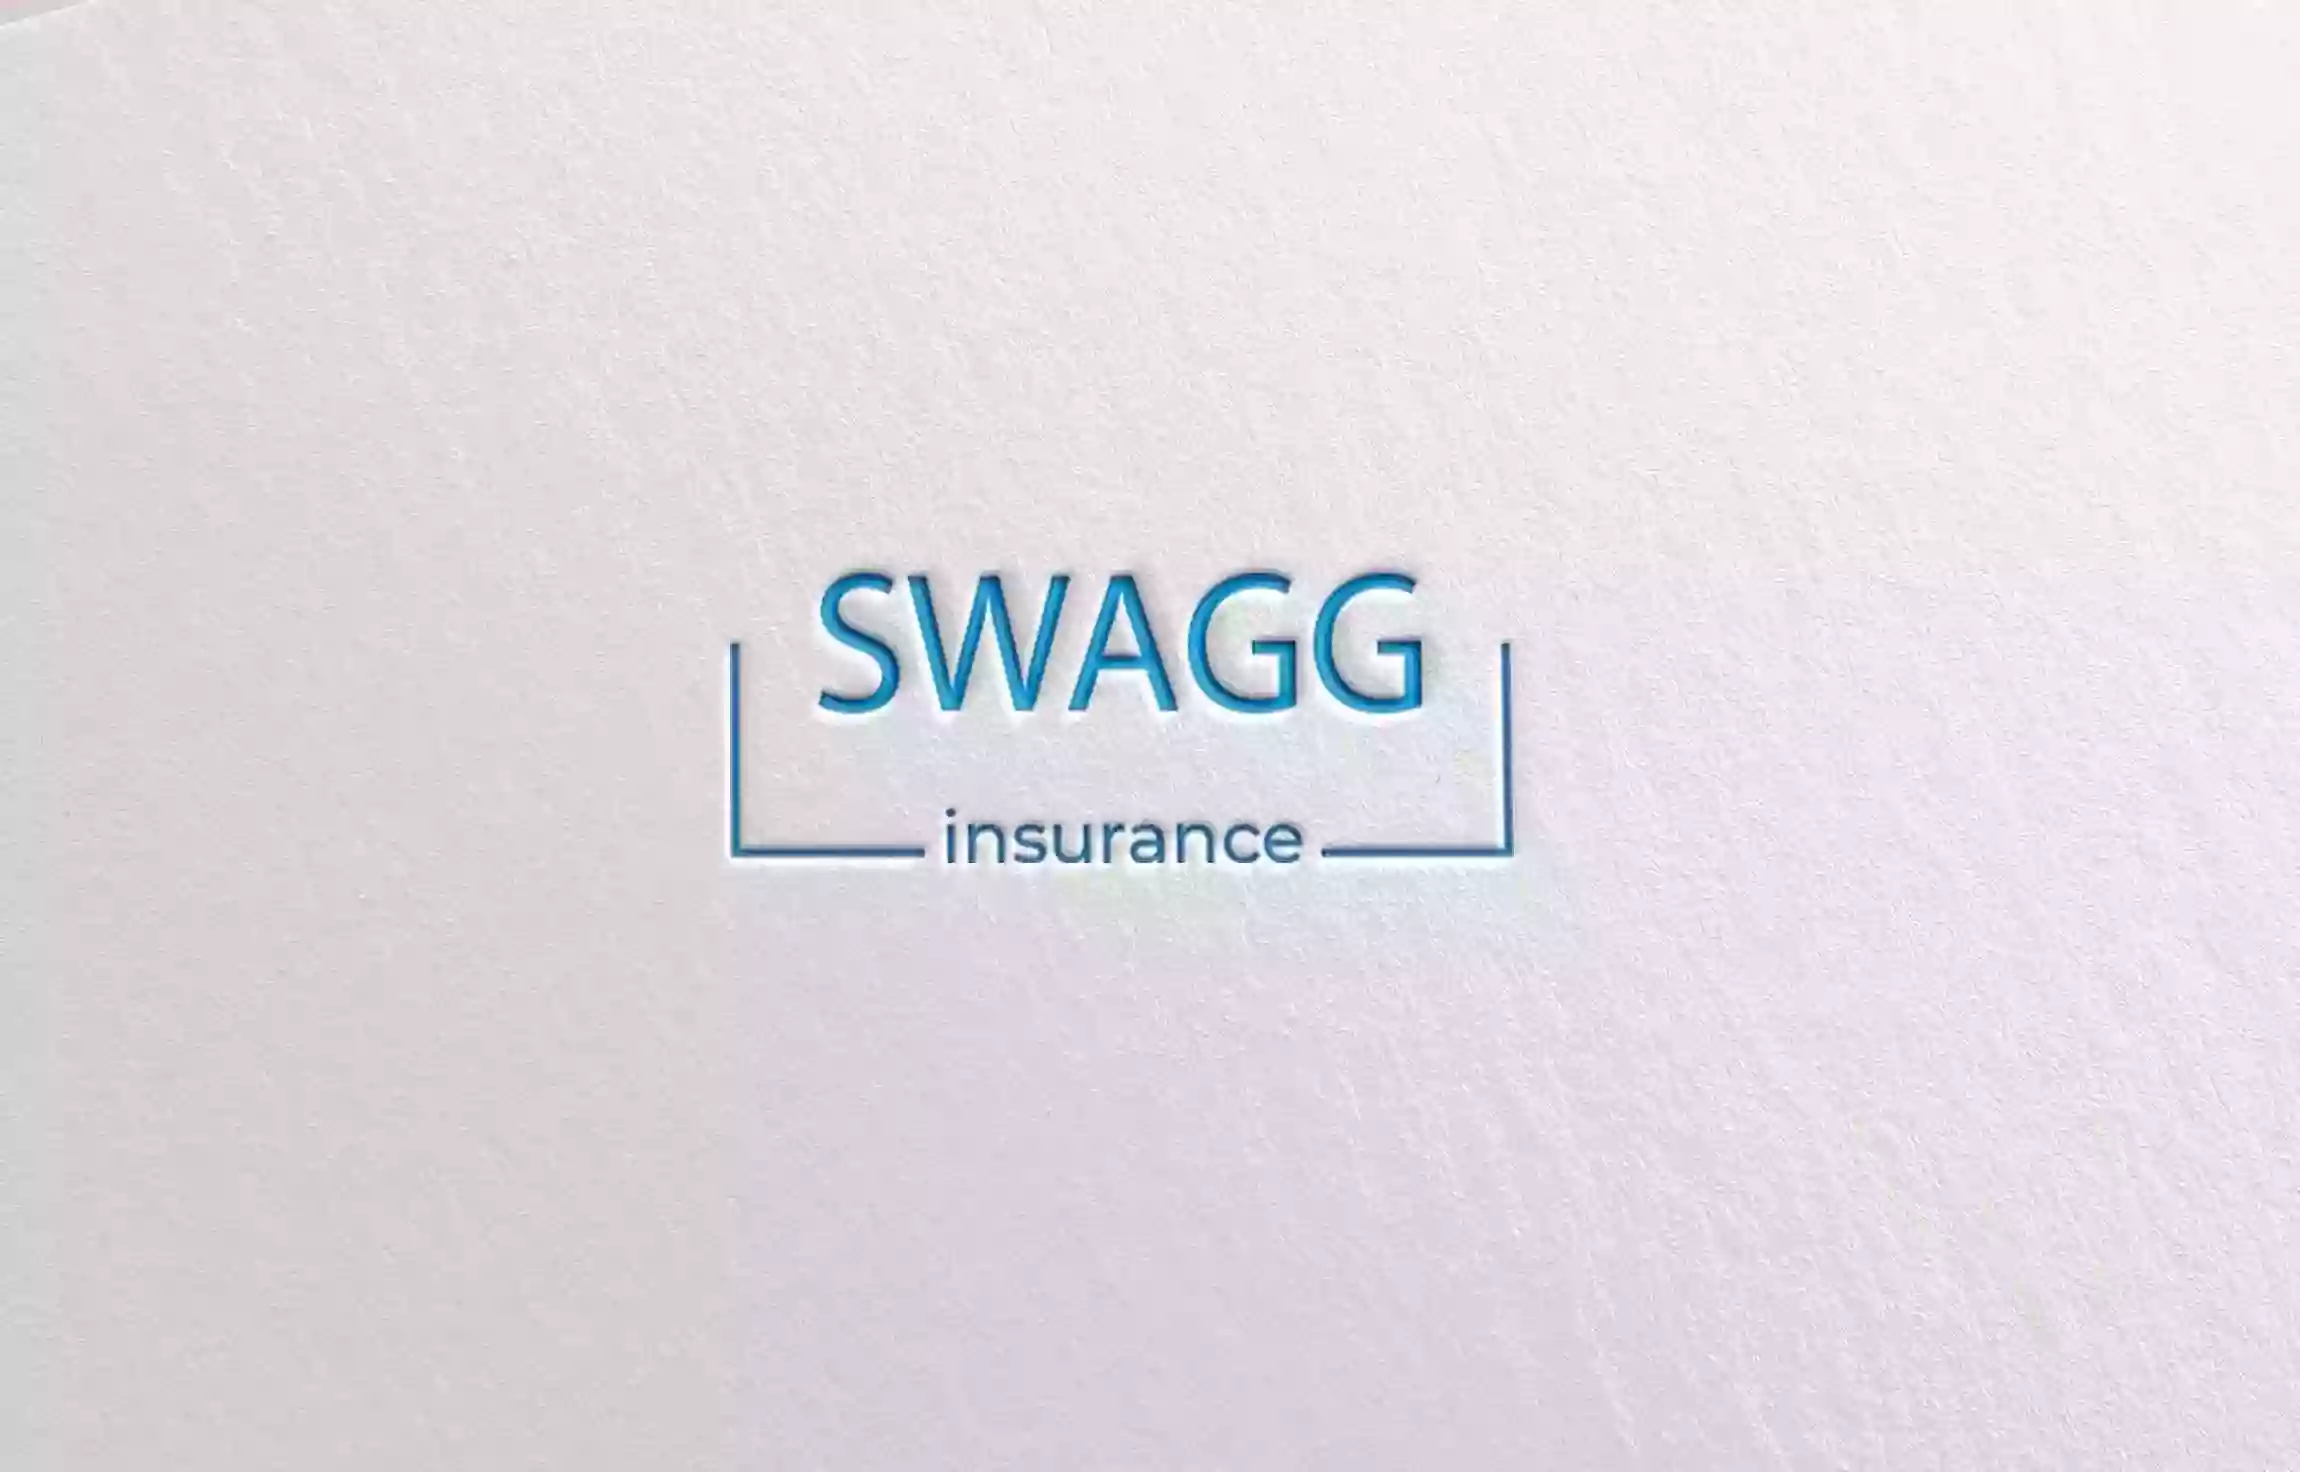 SWAGG | insurance